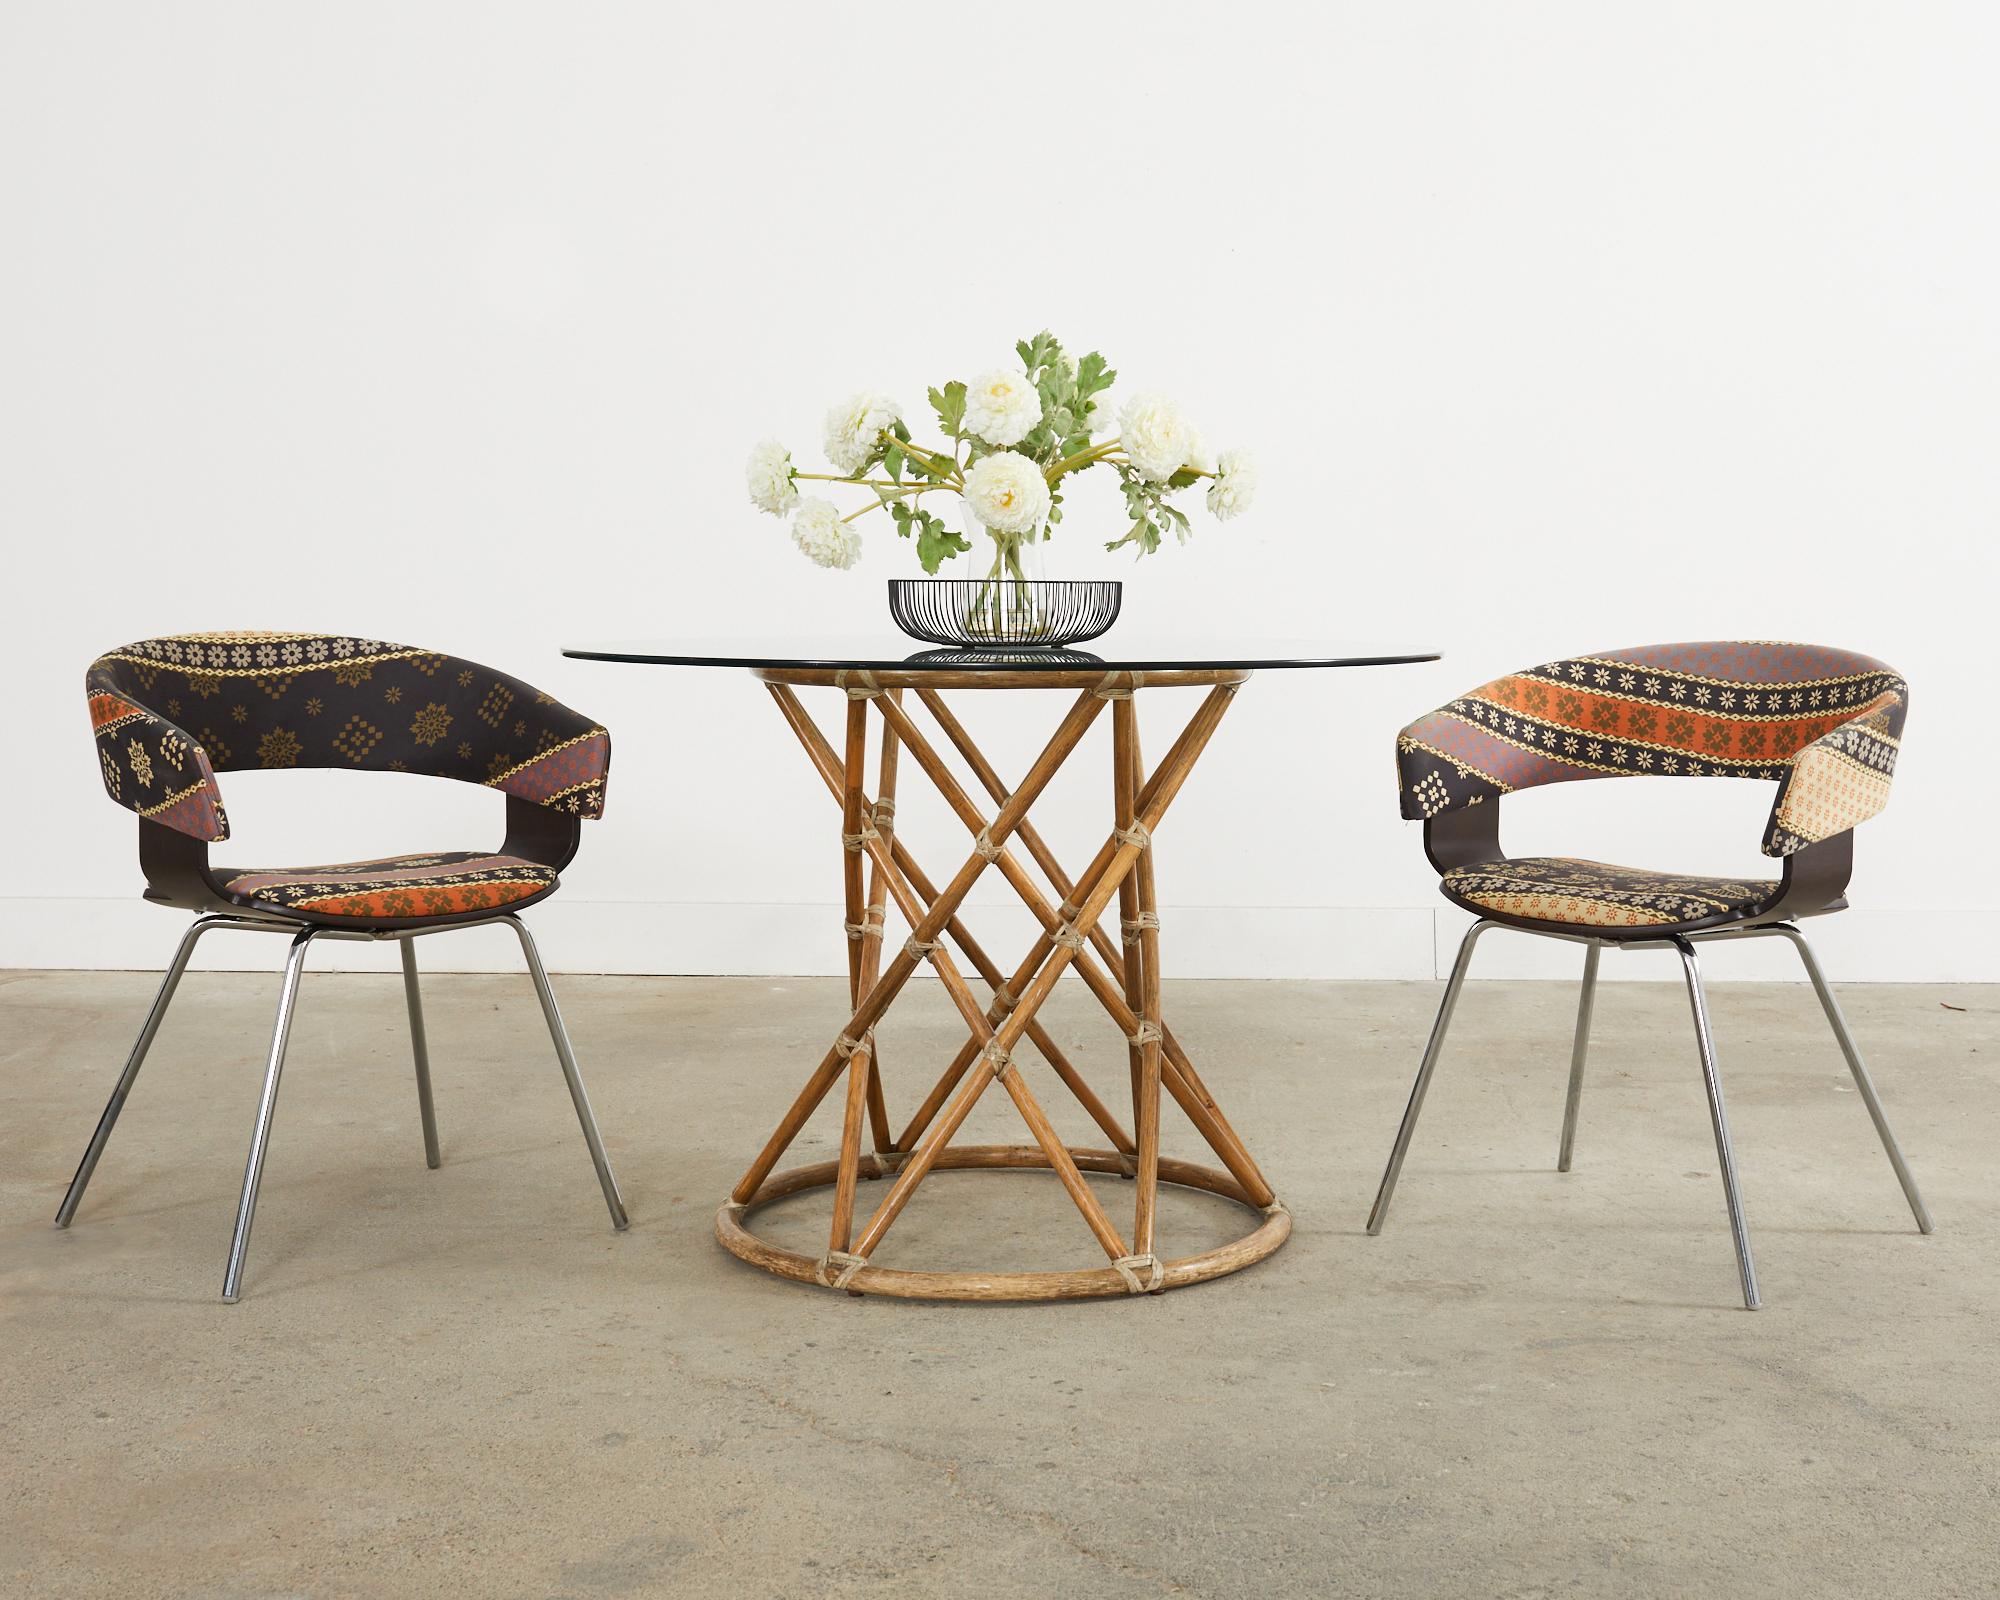 Chic set of six post modern dining armchairs designed by John Coleman for Allermuir in the late 20th century. Known as the Mollie chair A580 with a gracefully curved walnut finished shell supported by chromed steel legs. The stylish chairs feature a